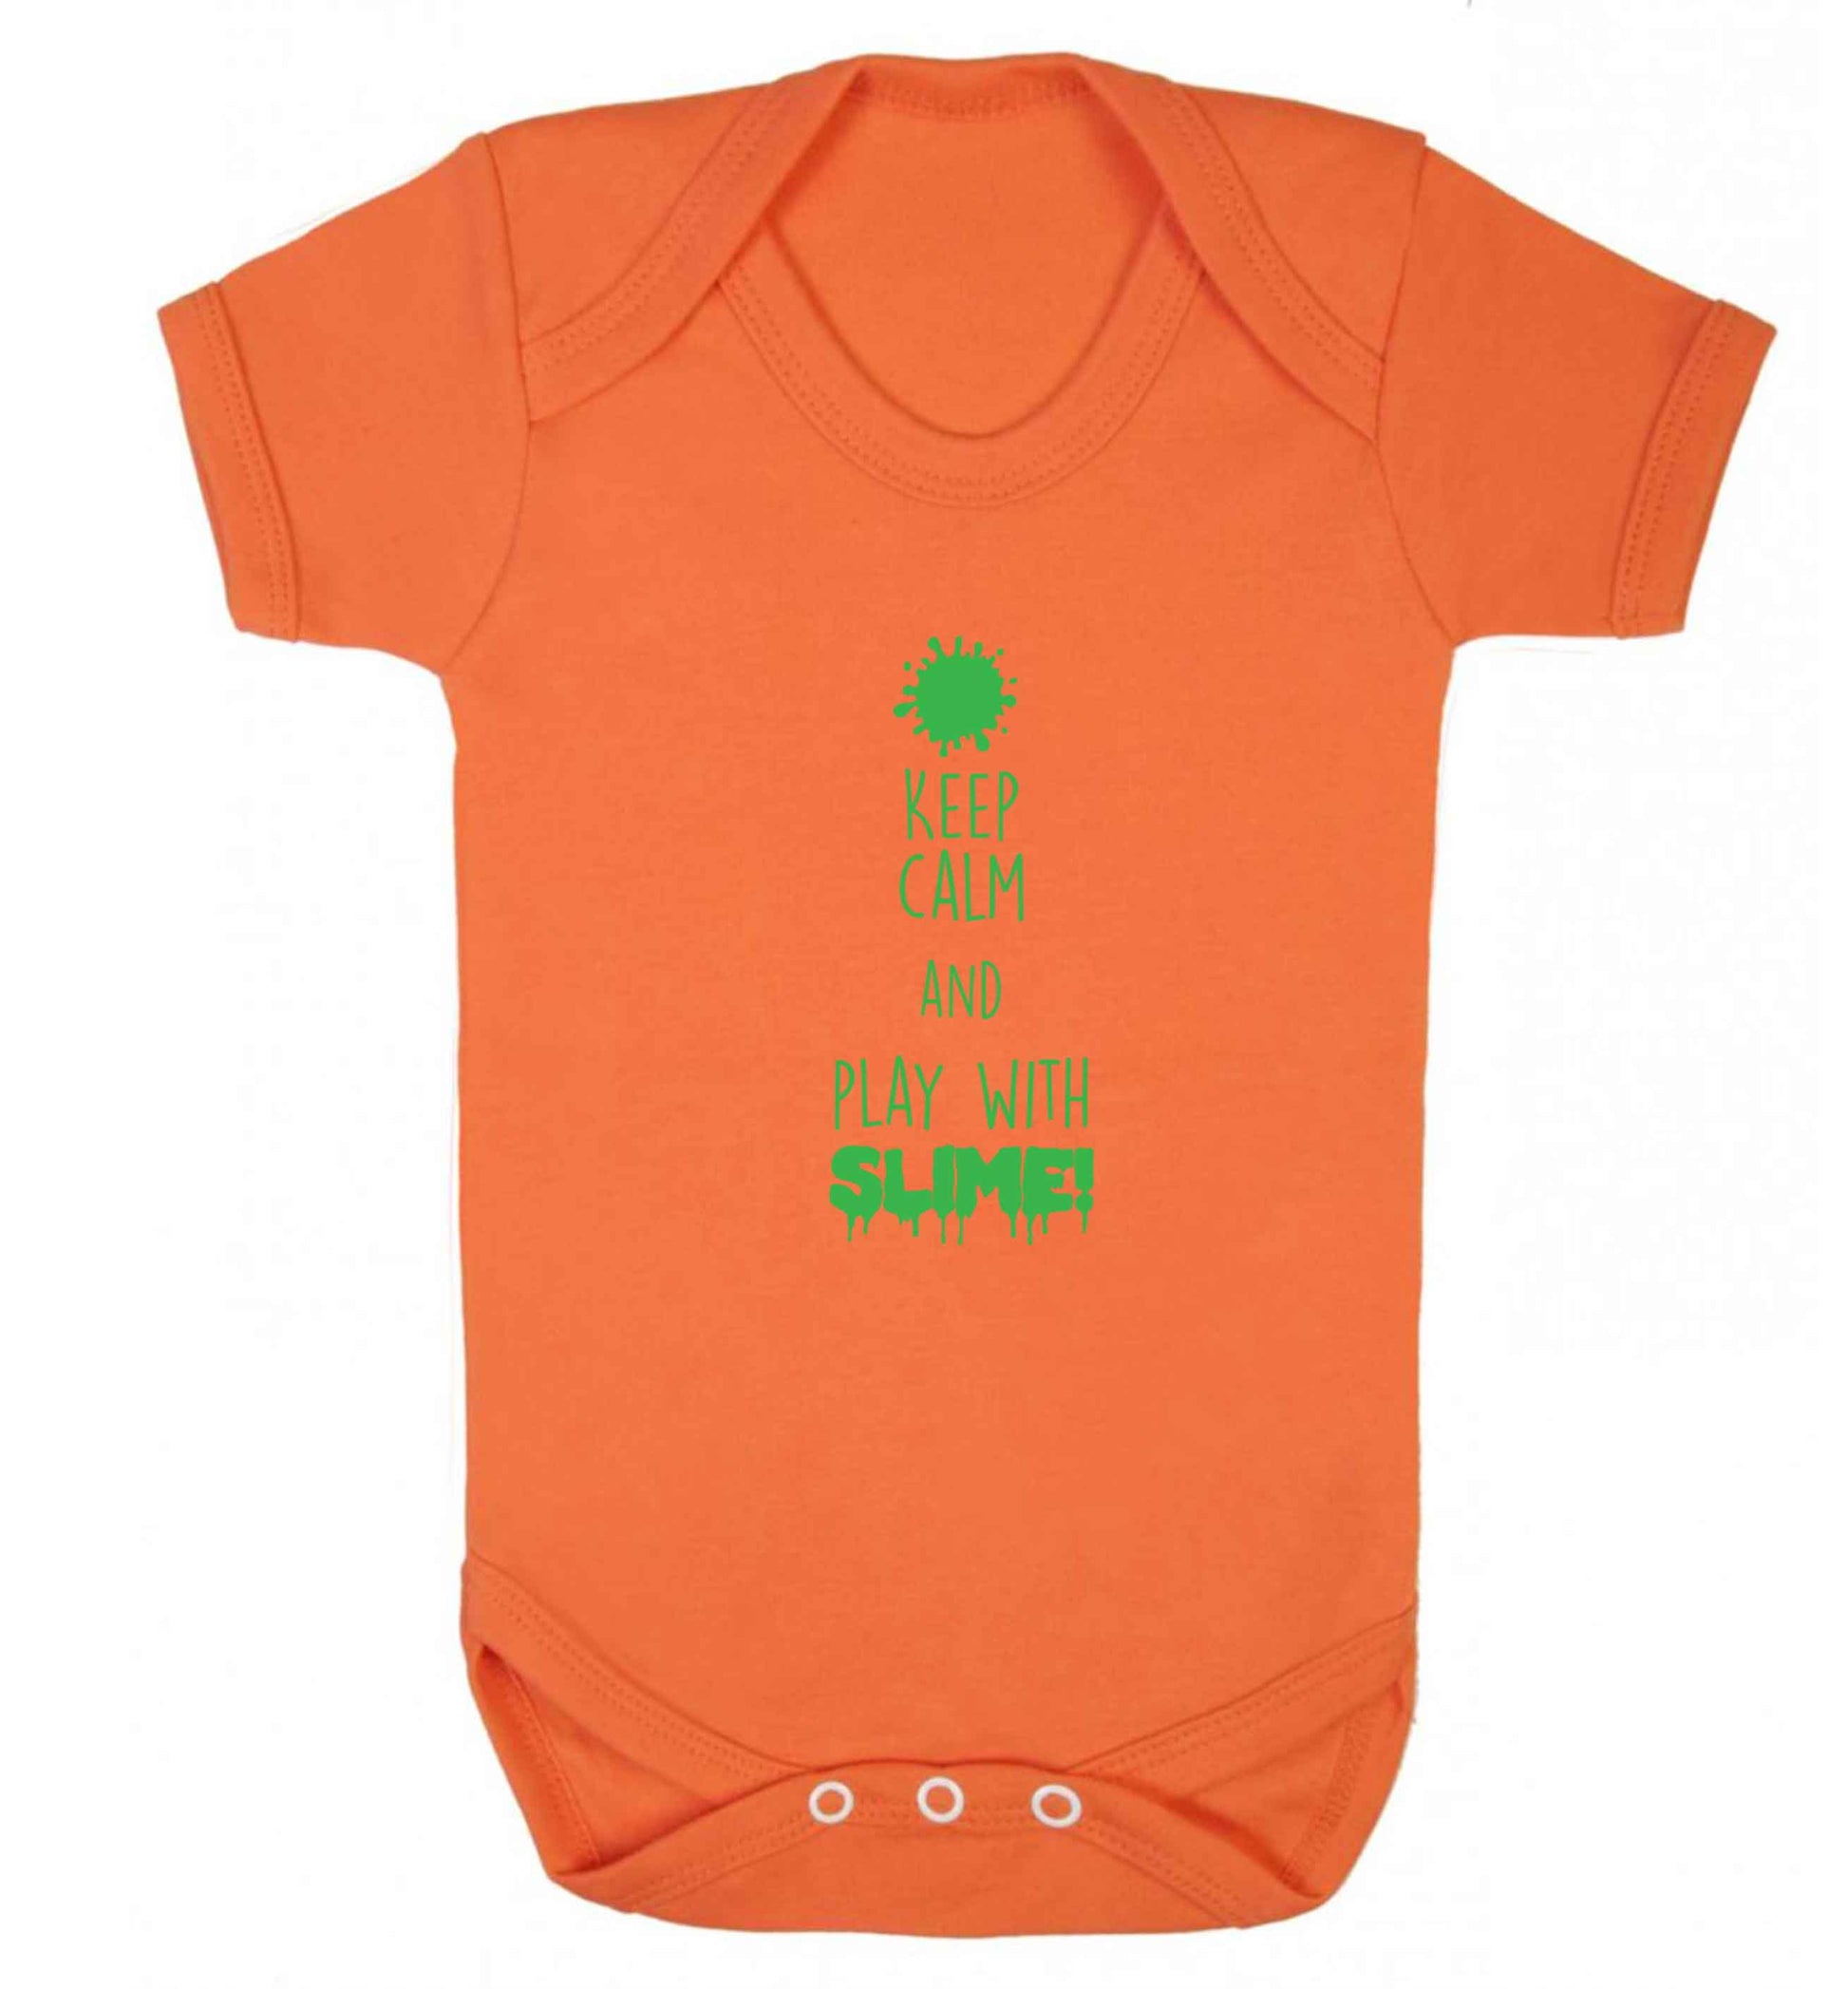 Neon green keep calm and play with slime!baby vest orange 18-24 months